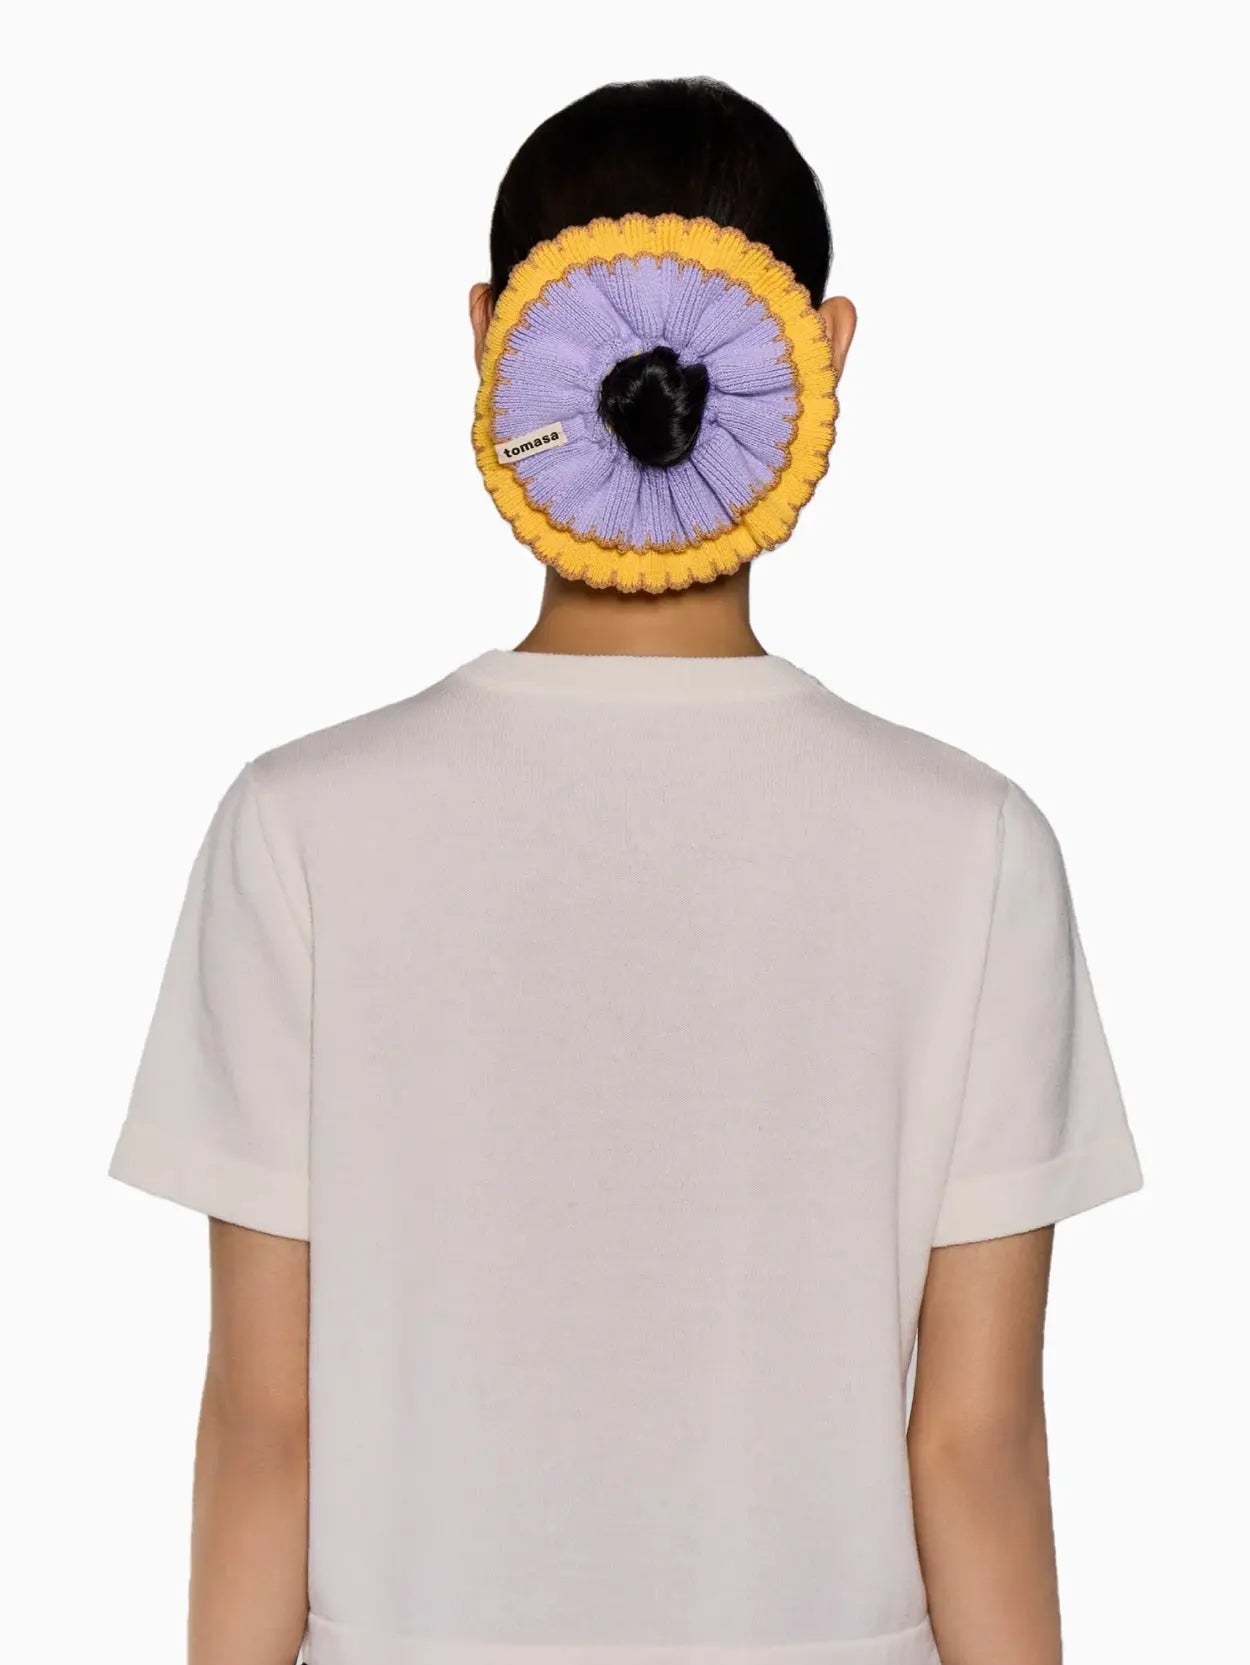 A circular, two-tone scrunchie called the "Ruffle Scrunchie Amanecer" by Tomasa is displayed against a white background. The outer part is yellow, and the inner part is purple with a ridged design. A small fabric label with the text "Tomasa" is attached to the inner part of the scrunchie, available exclusively at Bassalstore in Barcelona.